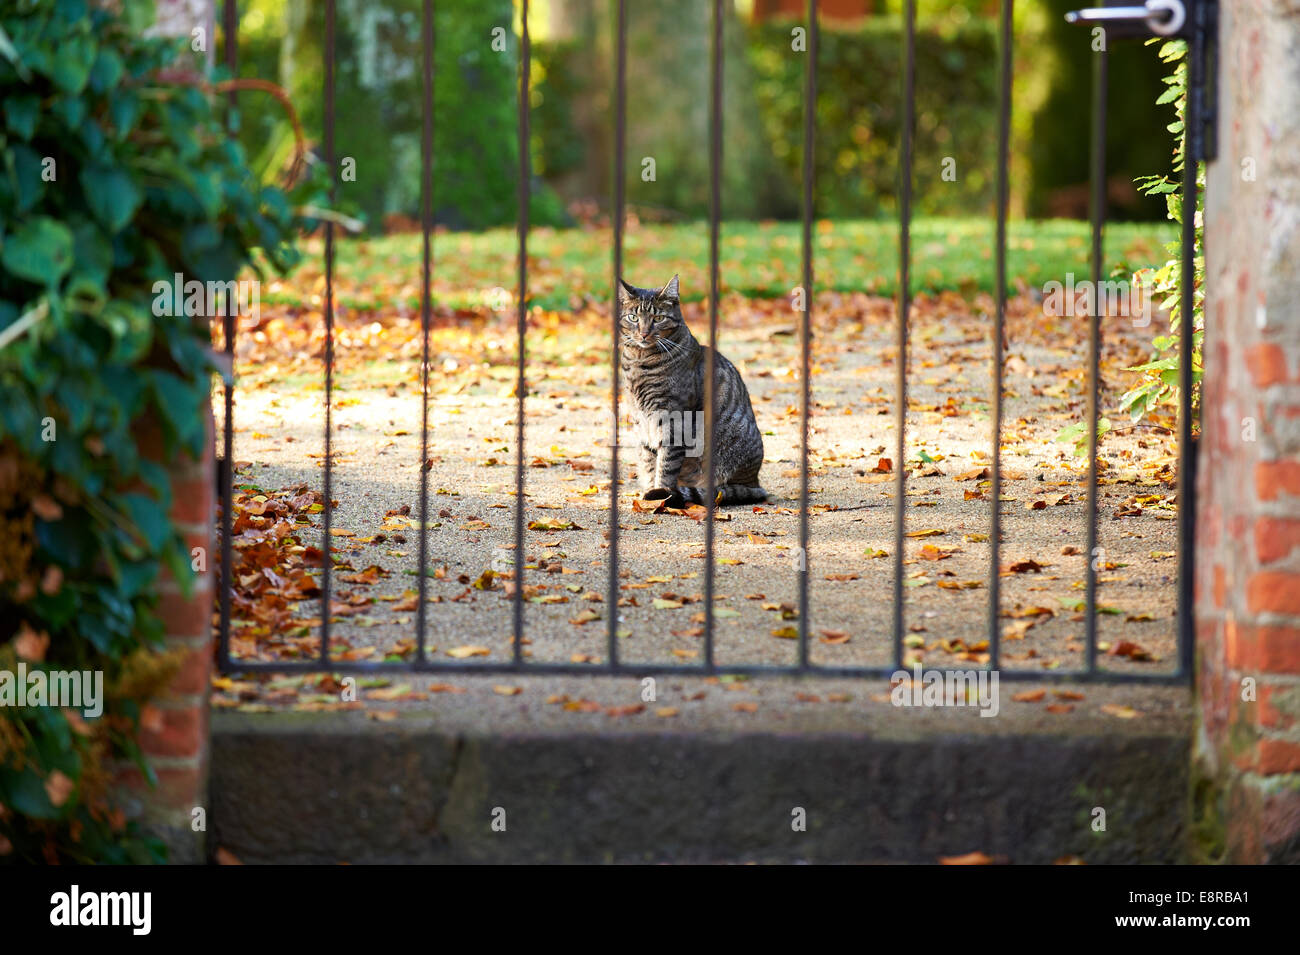 Cat behind bars of a gate Stock Photo